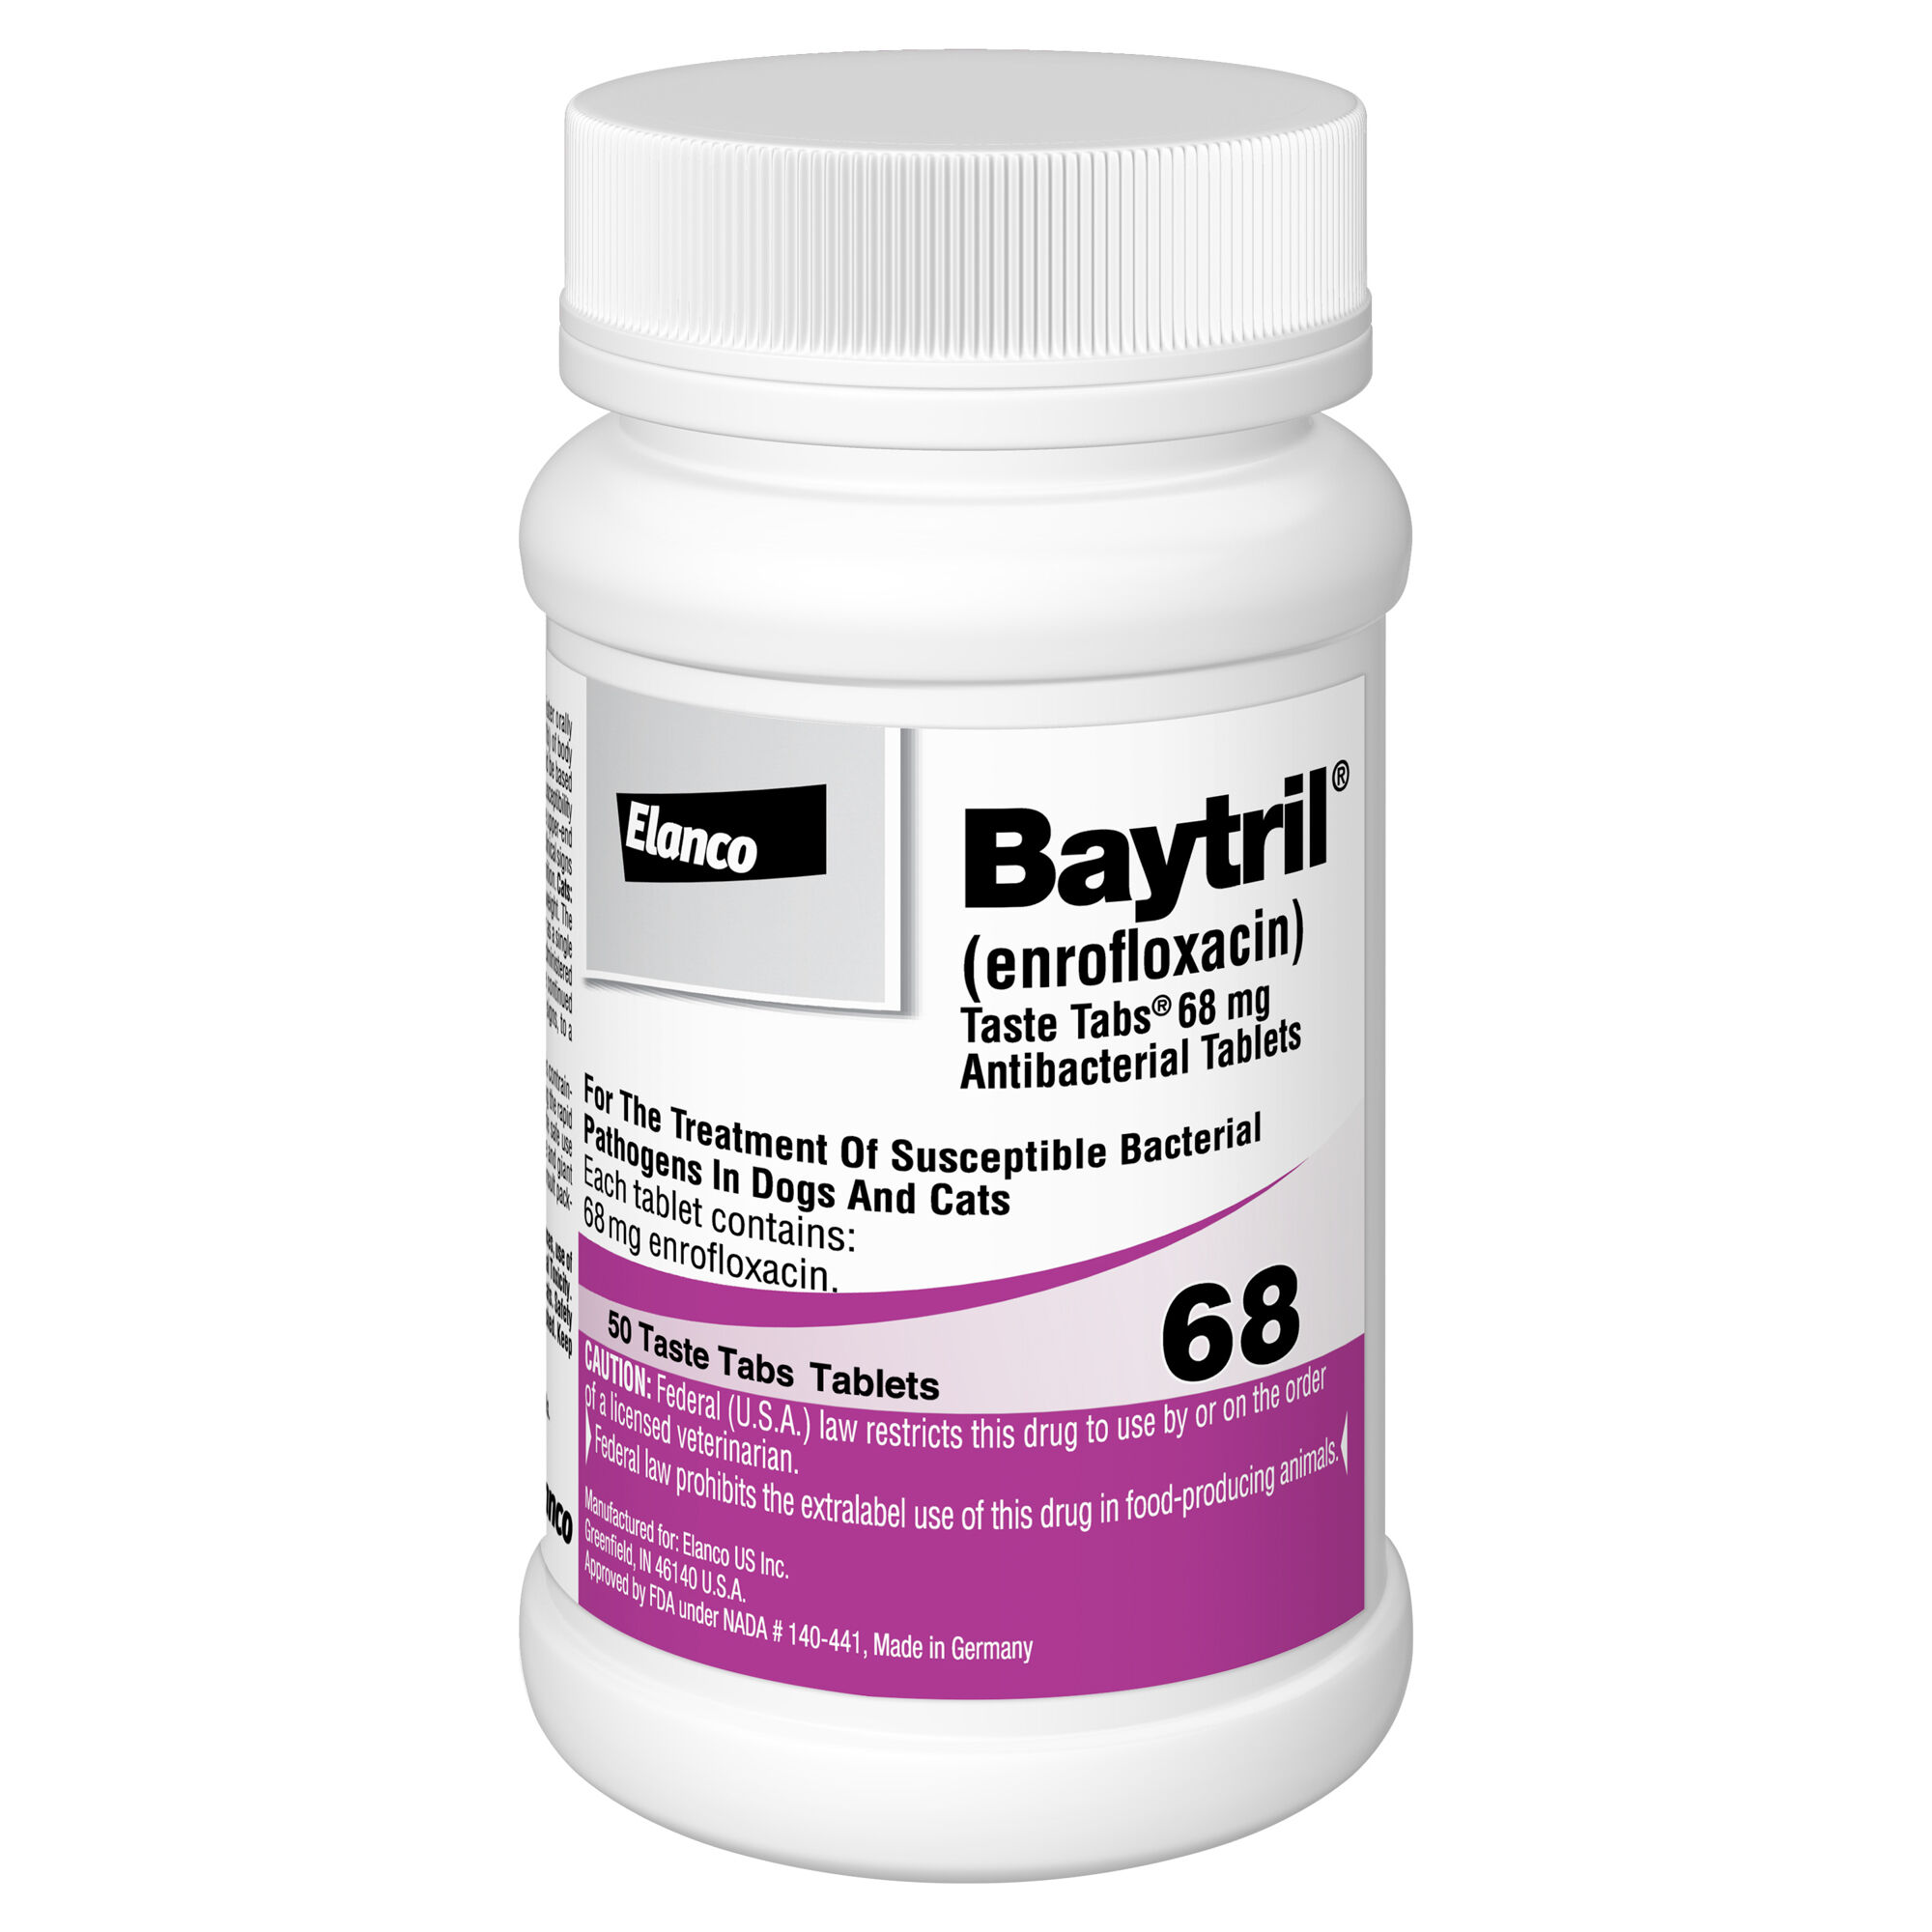 baytril otic for dogs